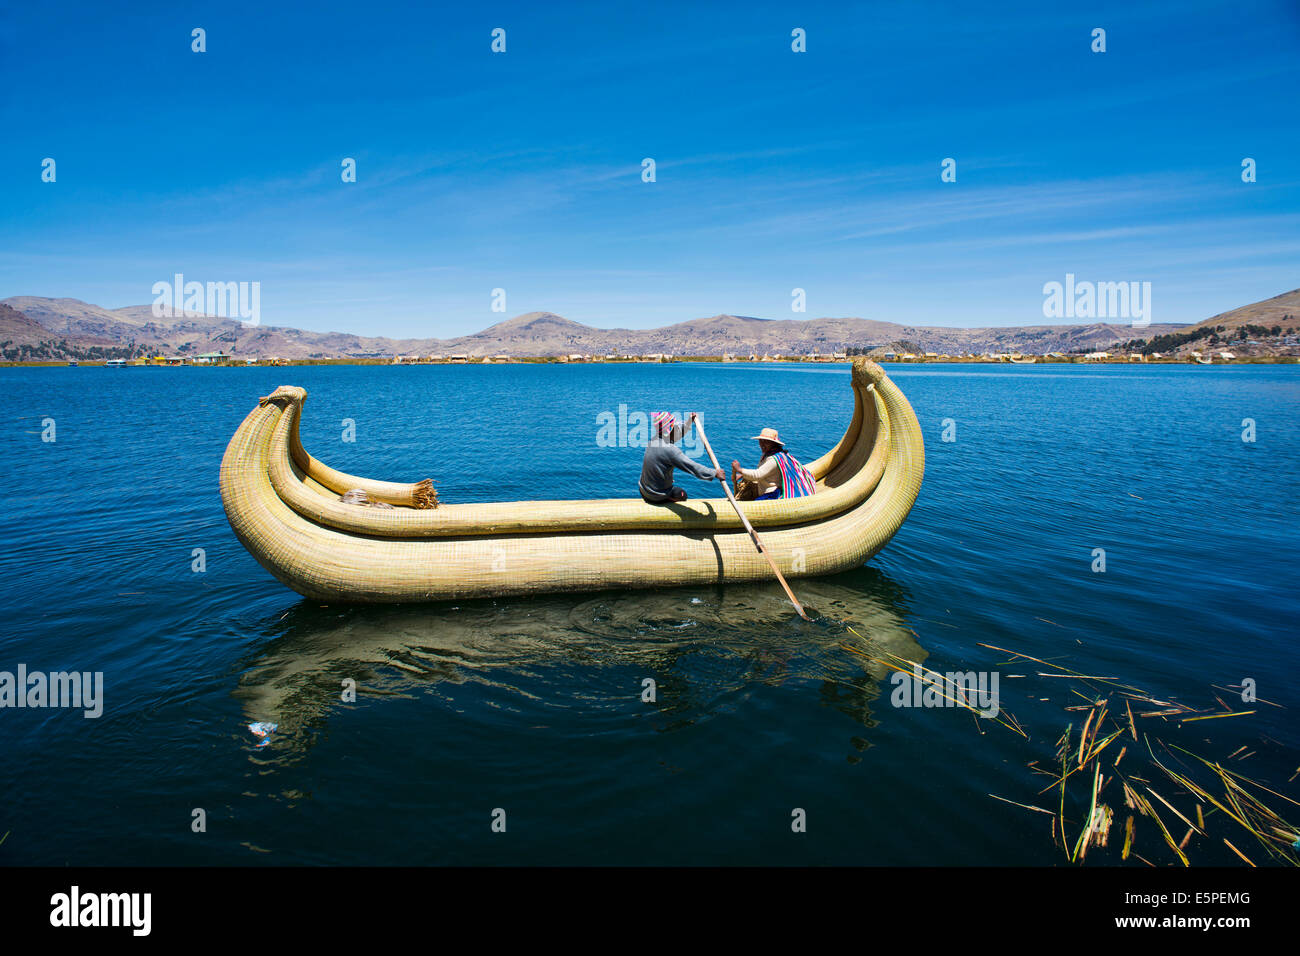 Two local in a traditional rowing boat of Totora reed on Lake Titicaca, Peru Stock Photo